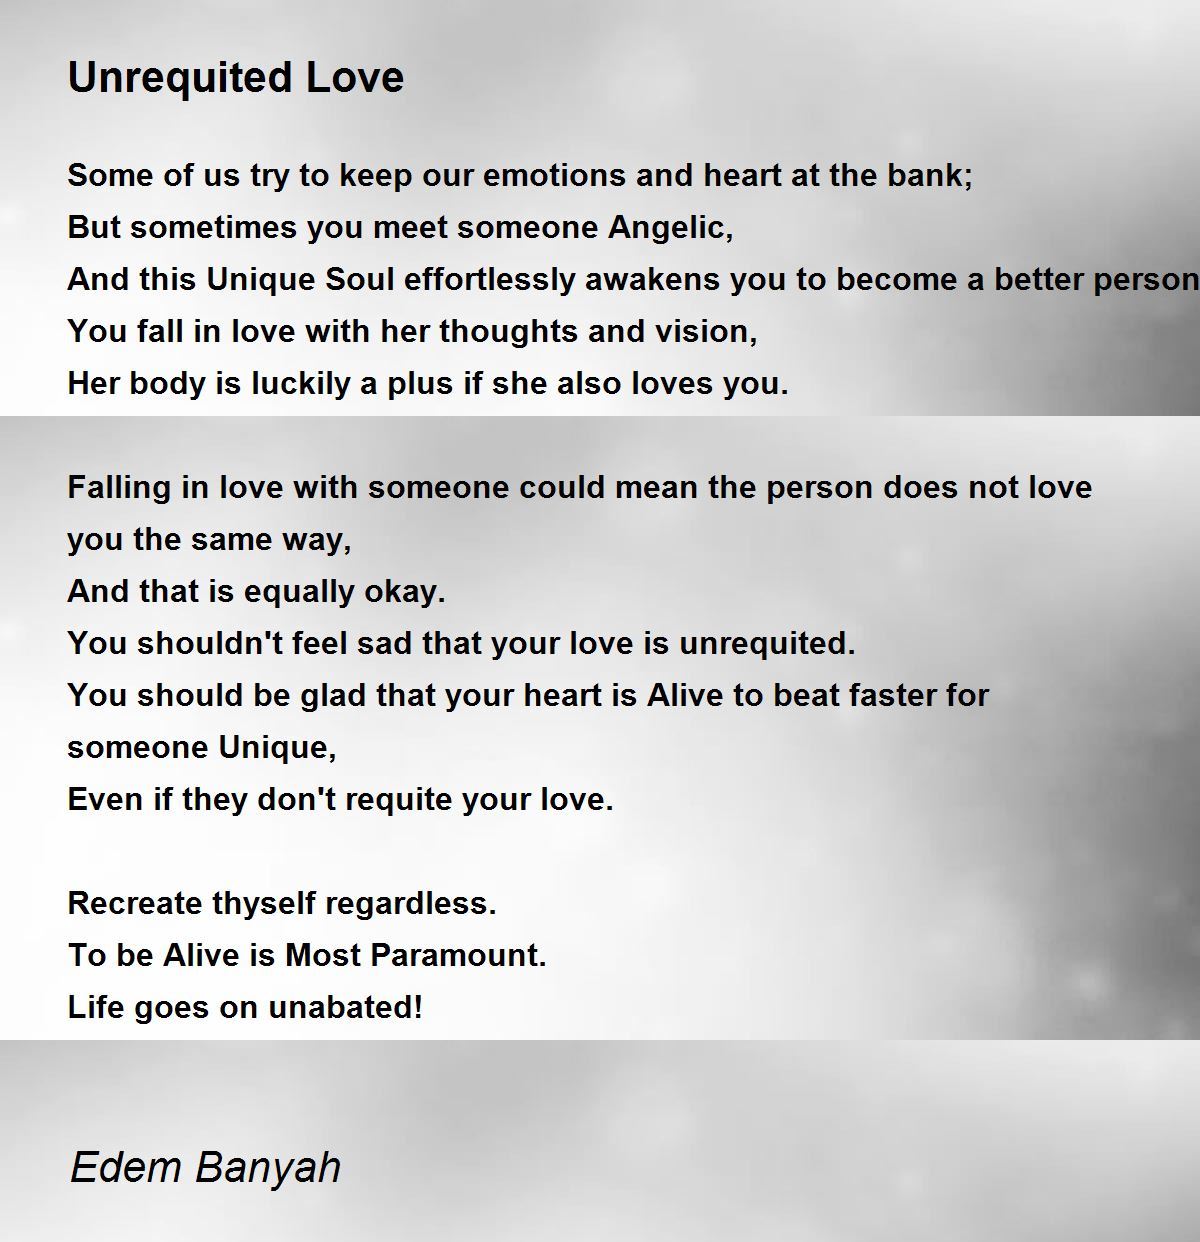 an essay on unrequited love